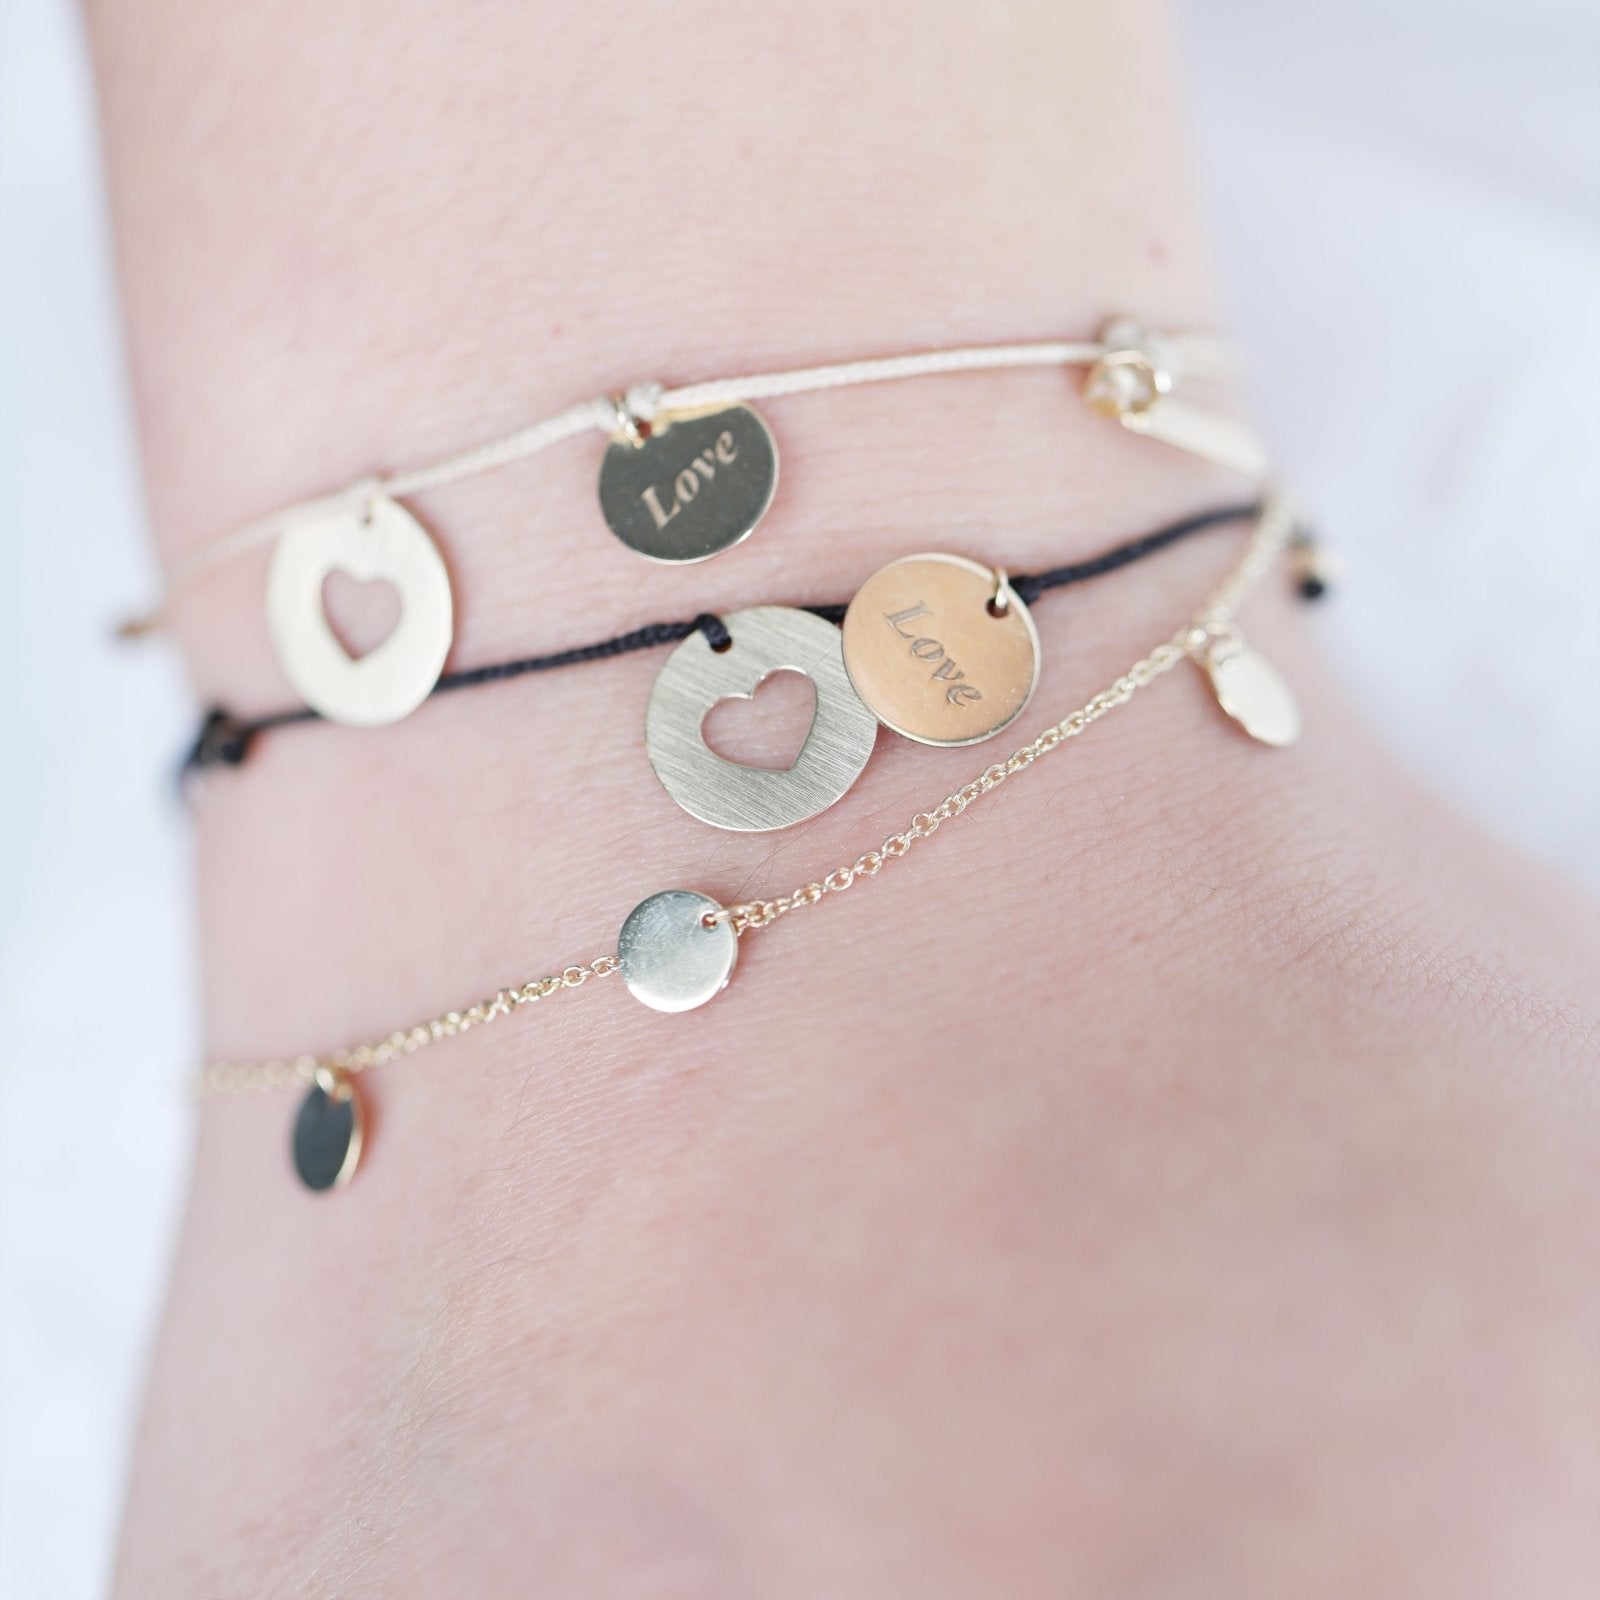 Love Charm Bracelet in Solid Yellow Gold Bracelets Estella Collection #product_description# 17671 14k Personalized Jewelry Ready to Ship #tag4# #tag5# #tag6# #tag7# #tag8# #tag9# #tag10#